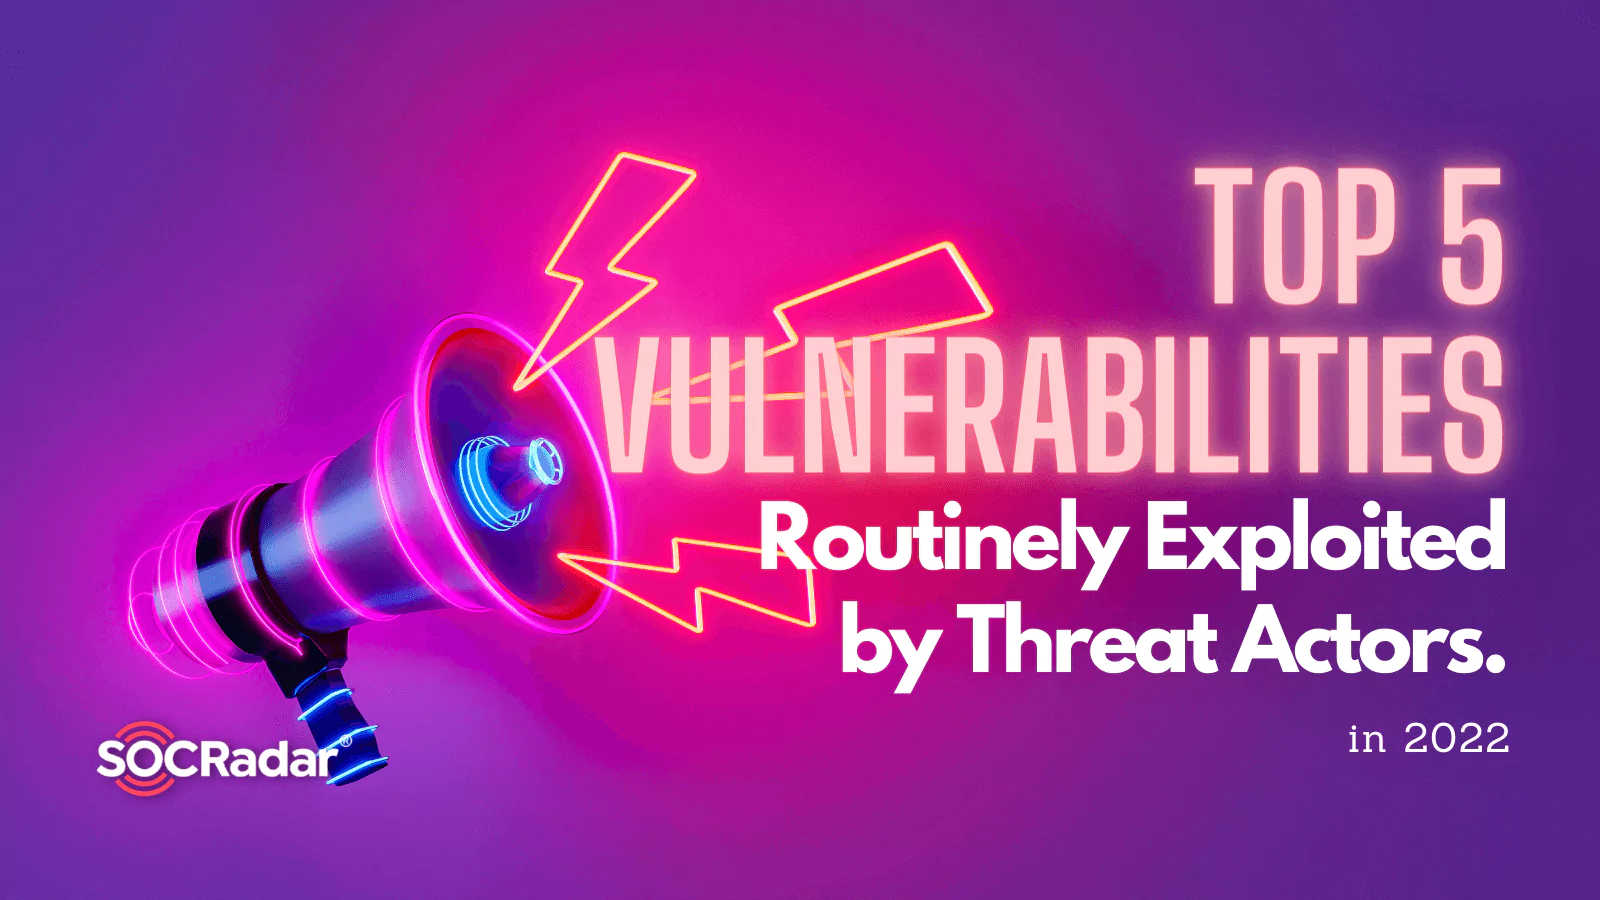 SOCRadar® Cyber Intelligence Inc. | Top 5 Vulnerabilities Routinely Exploited by Threat Actors in 2022